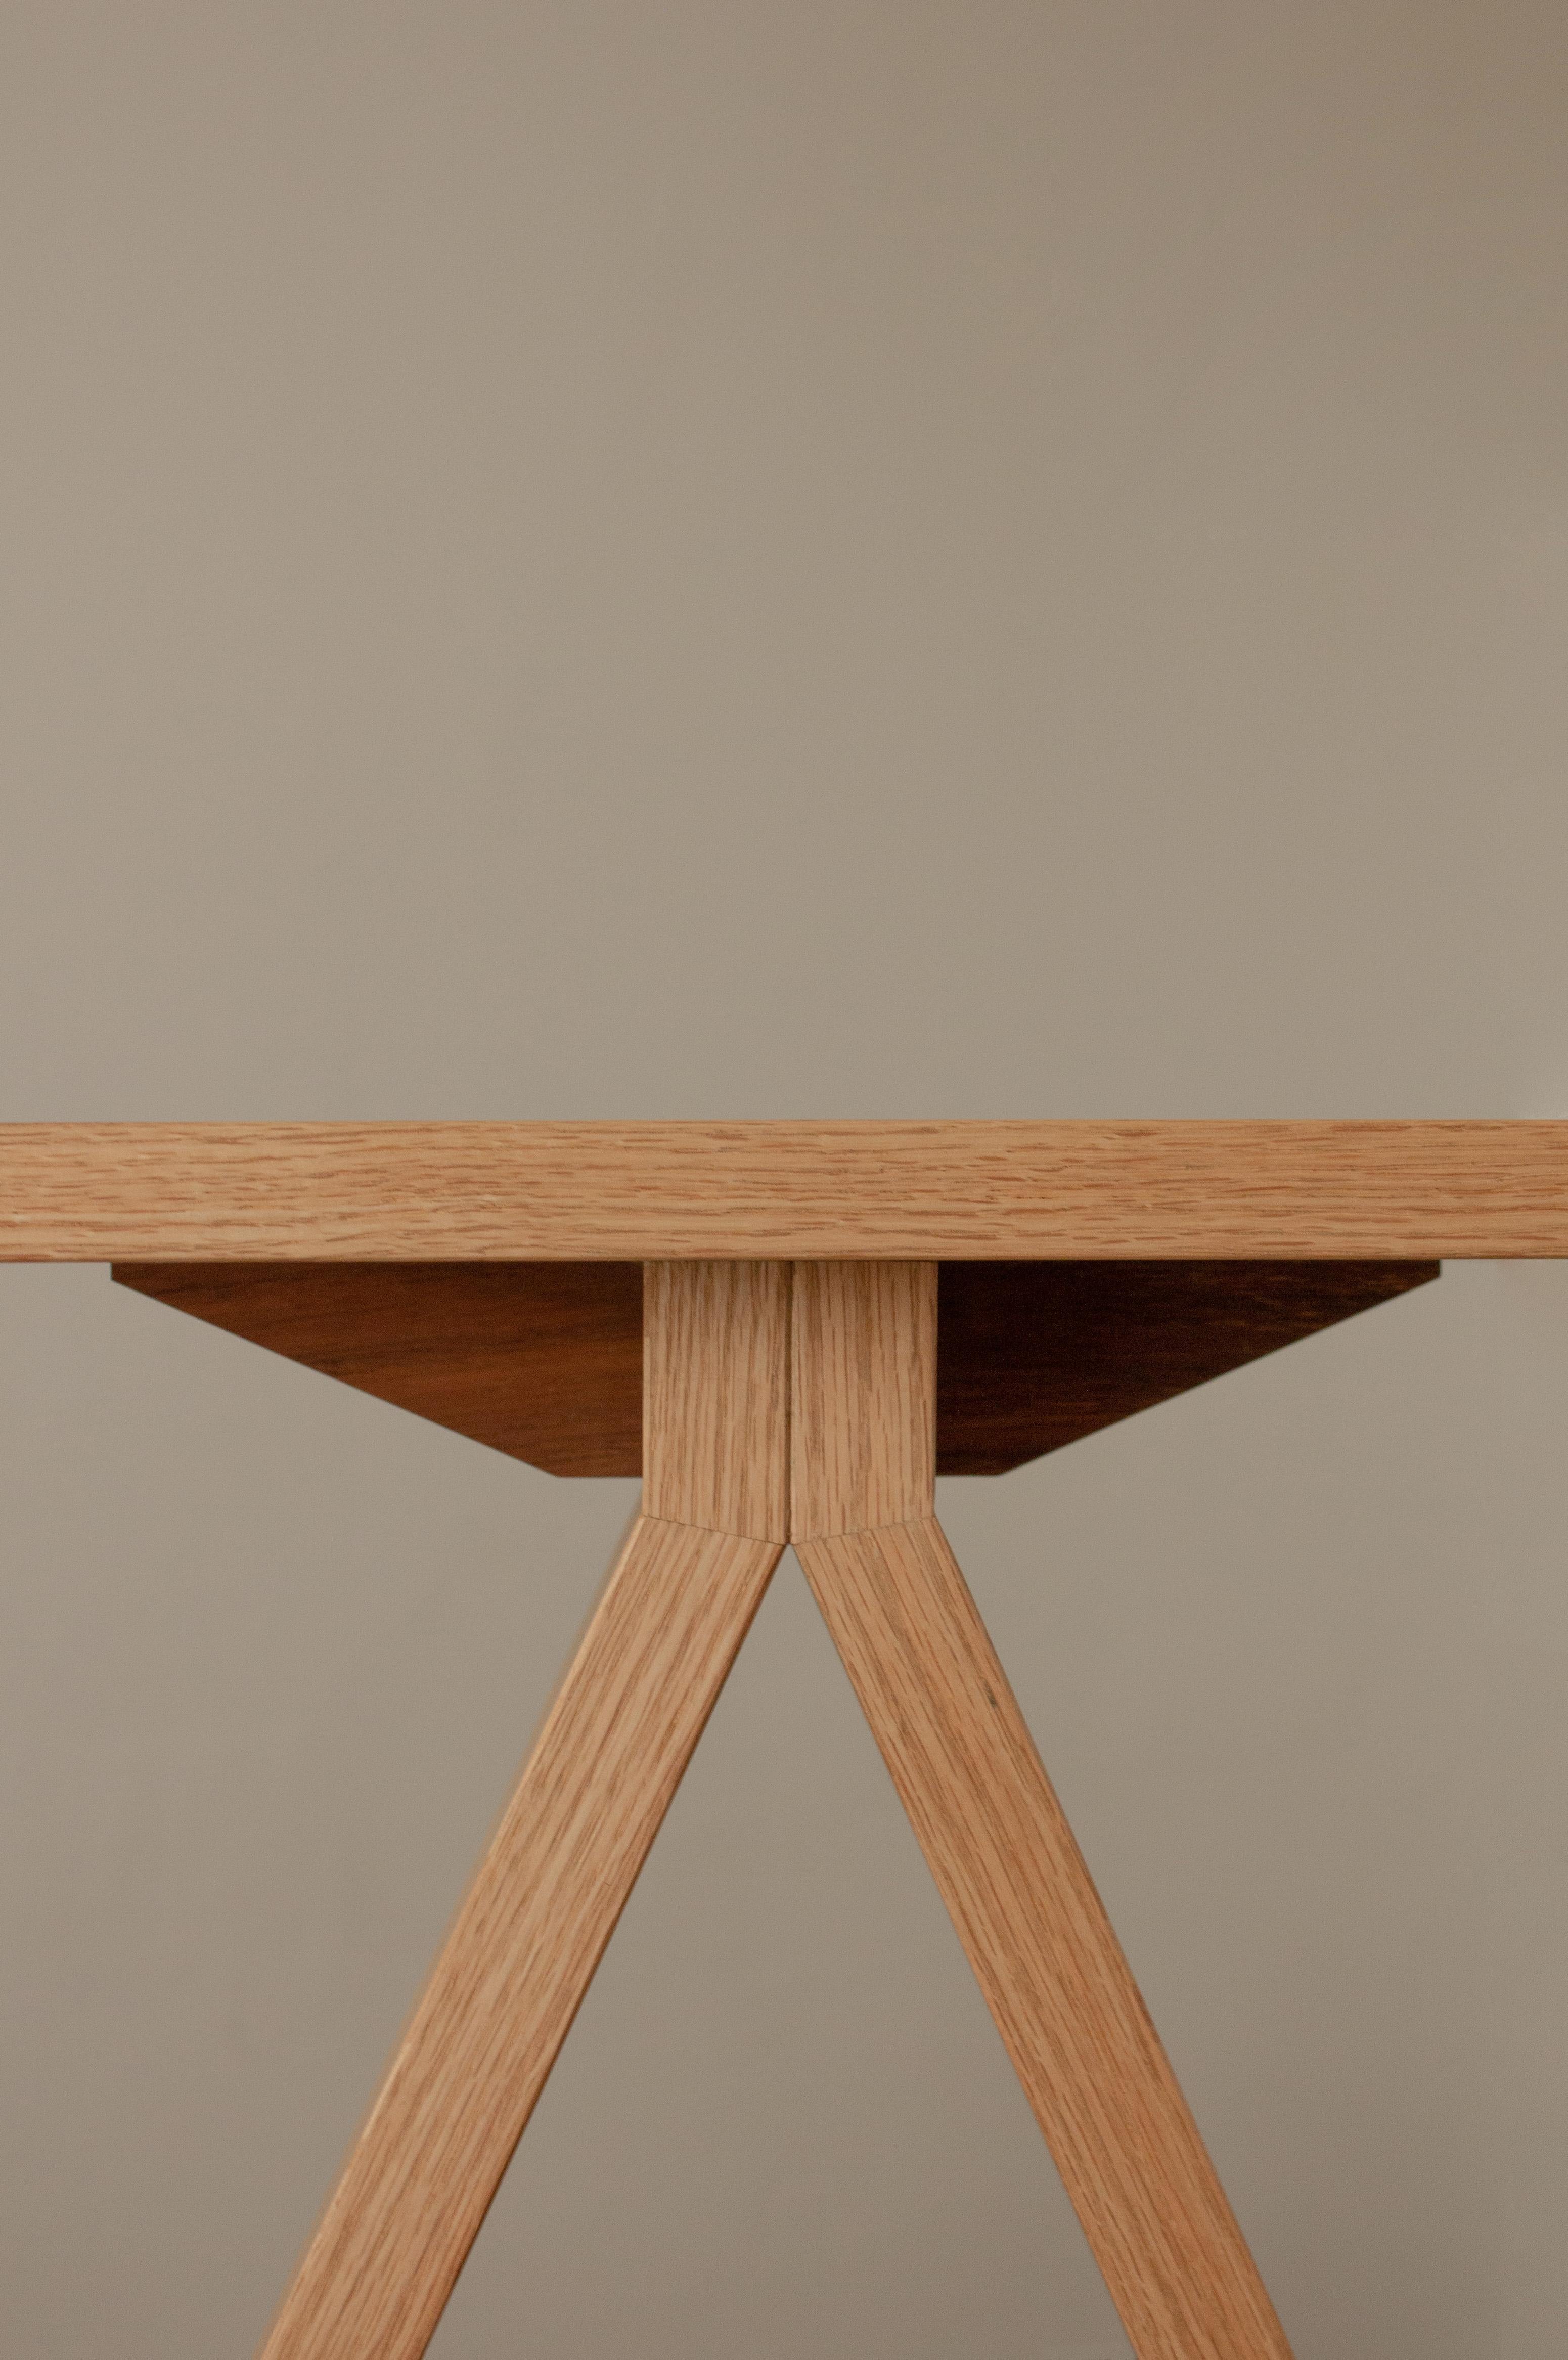 Hand-Crafted Minimal Wooden Stool 